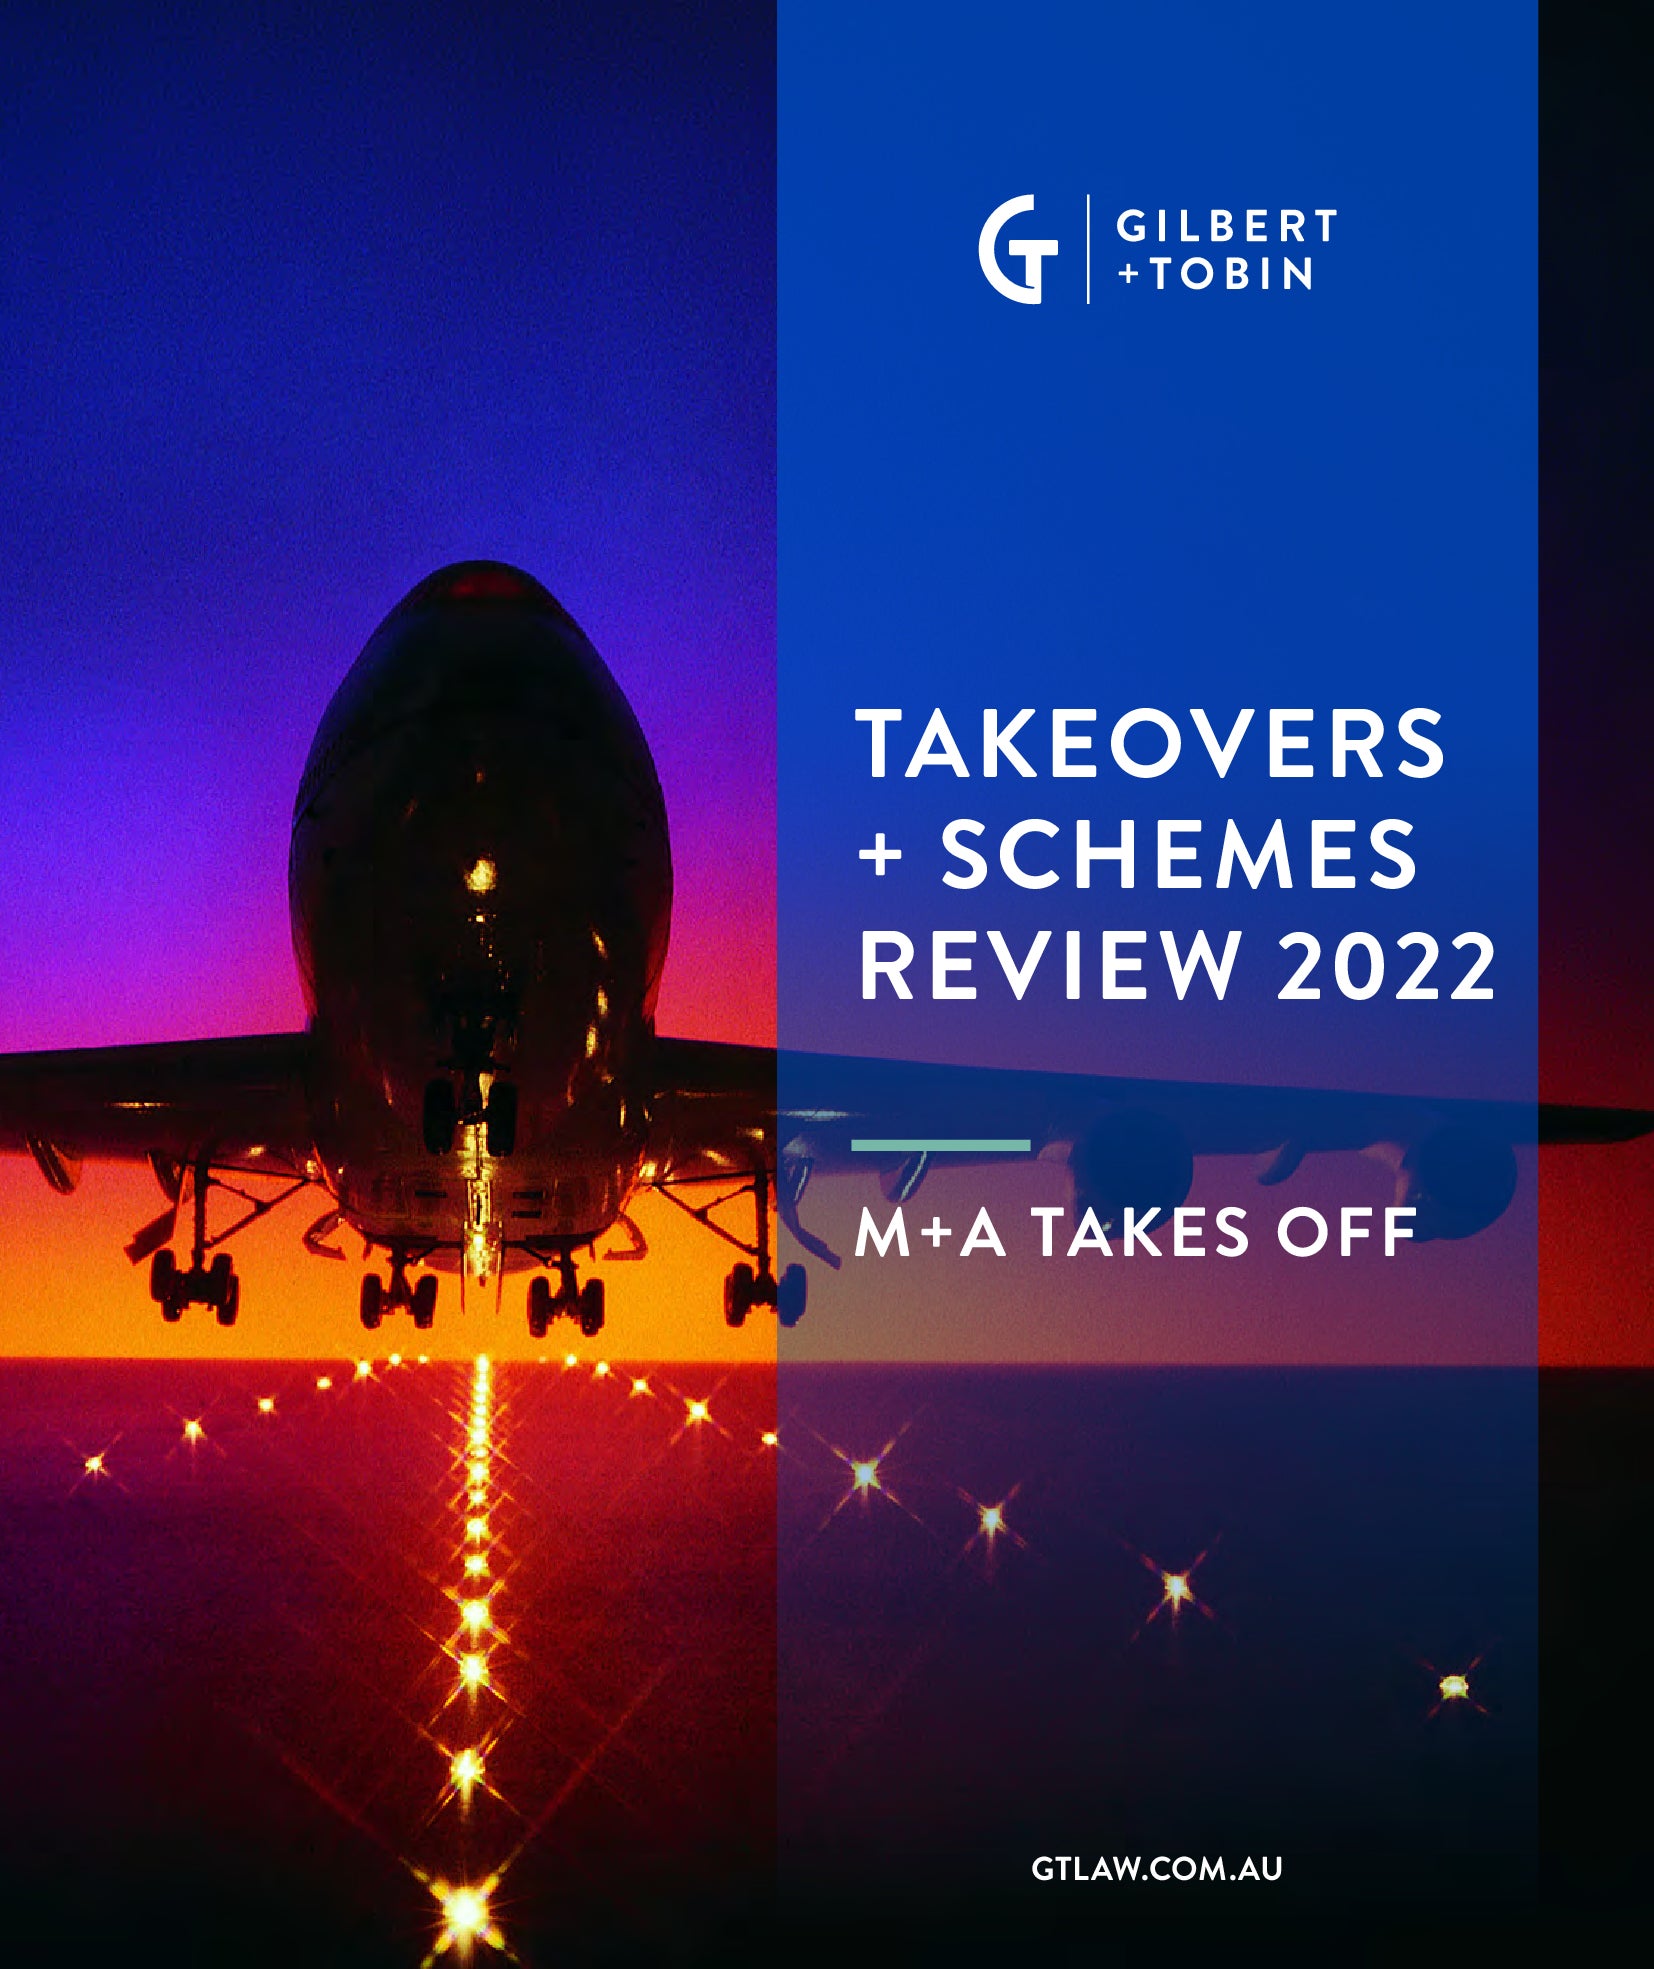 Takeovers & Schemes Review 2022